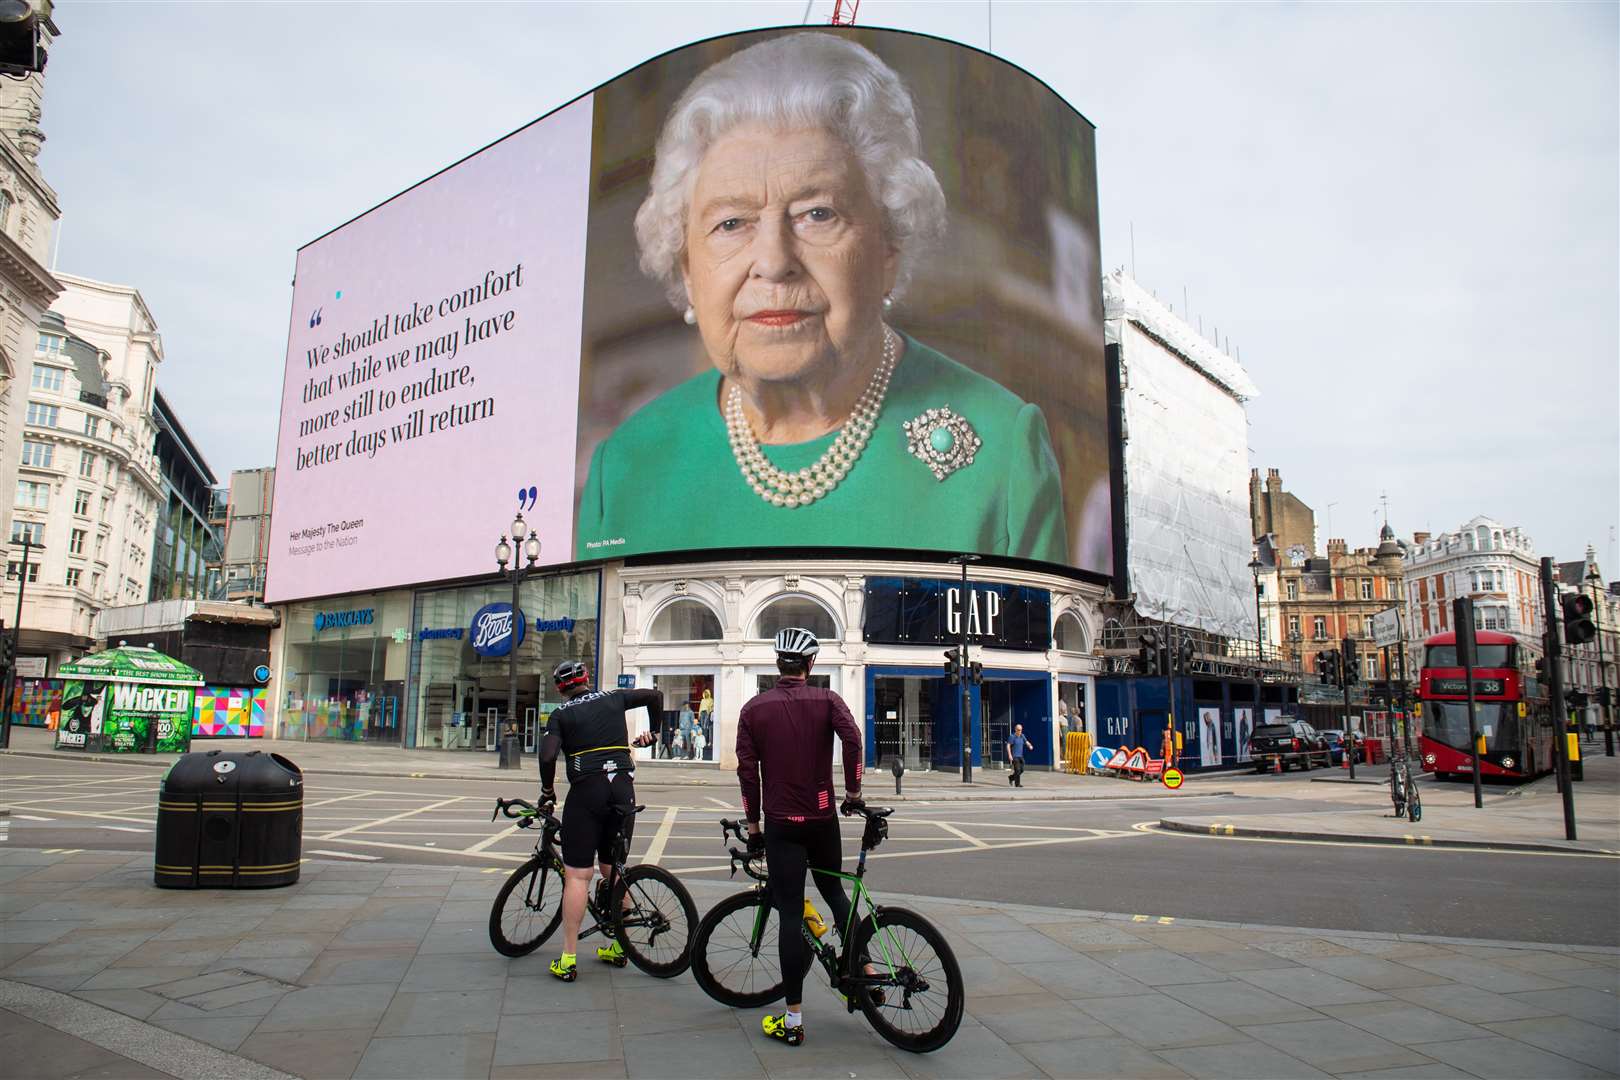 The Queen’s words from her broadcast to the UK and the Commonwealth are displayed in lights in London’s Piccadilly Circus (Dominic Lipinski/PA)